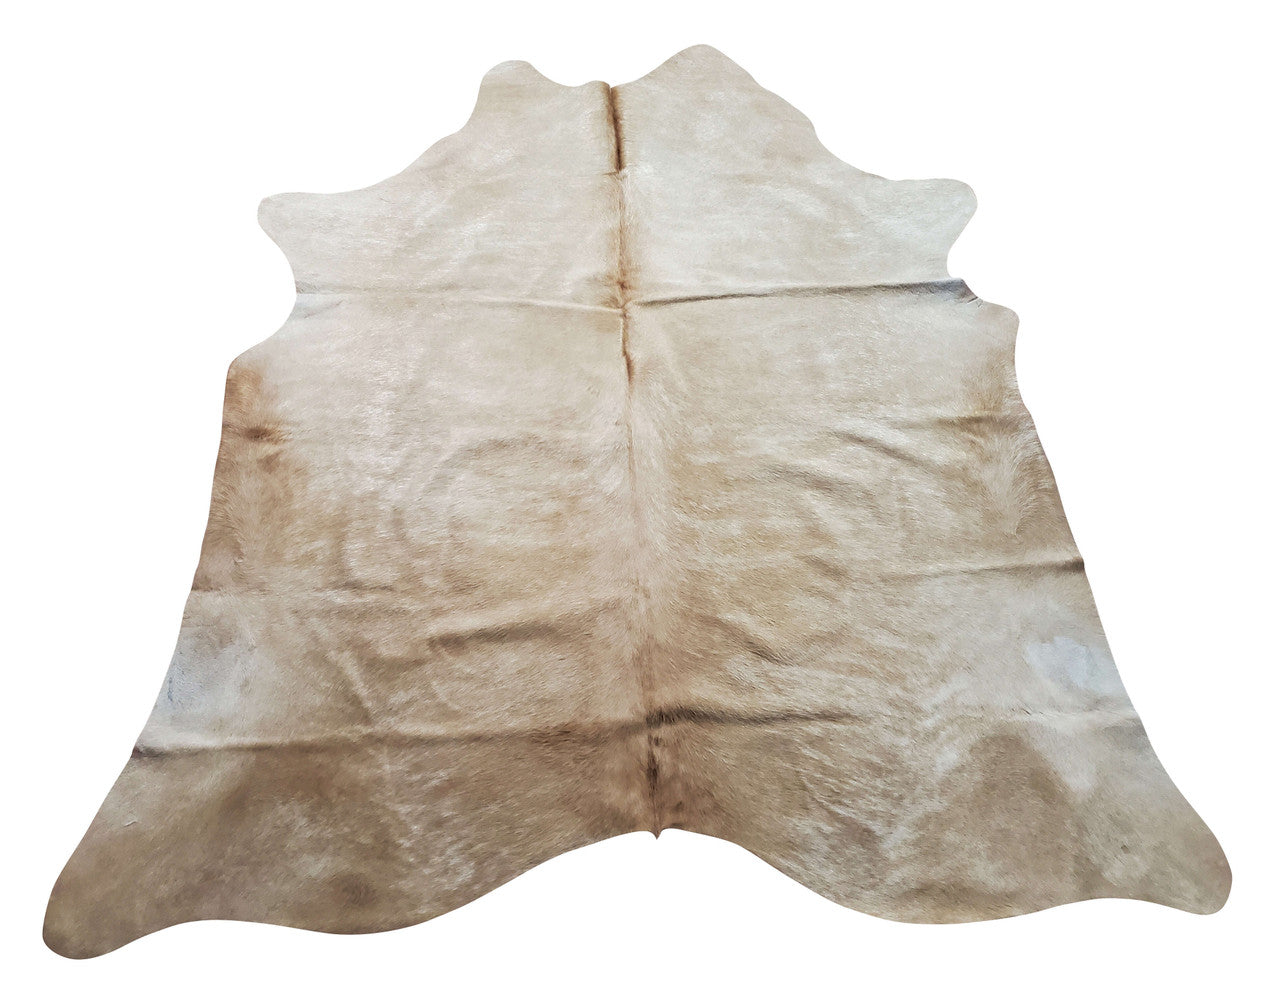 This cowhide rug in natural beige will give a neutral touch to any type of property design due to hardwood flooring to gray sofa. All our cowhides are made up of soft, smooth leather.
